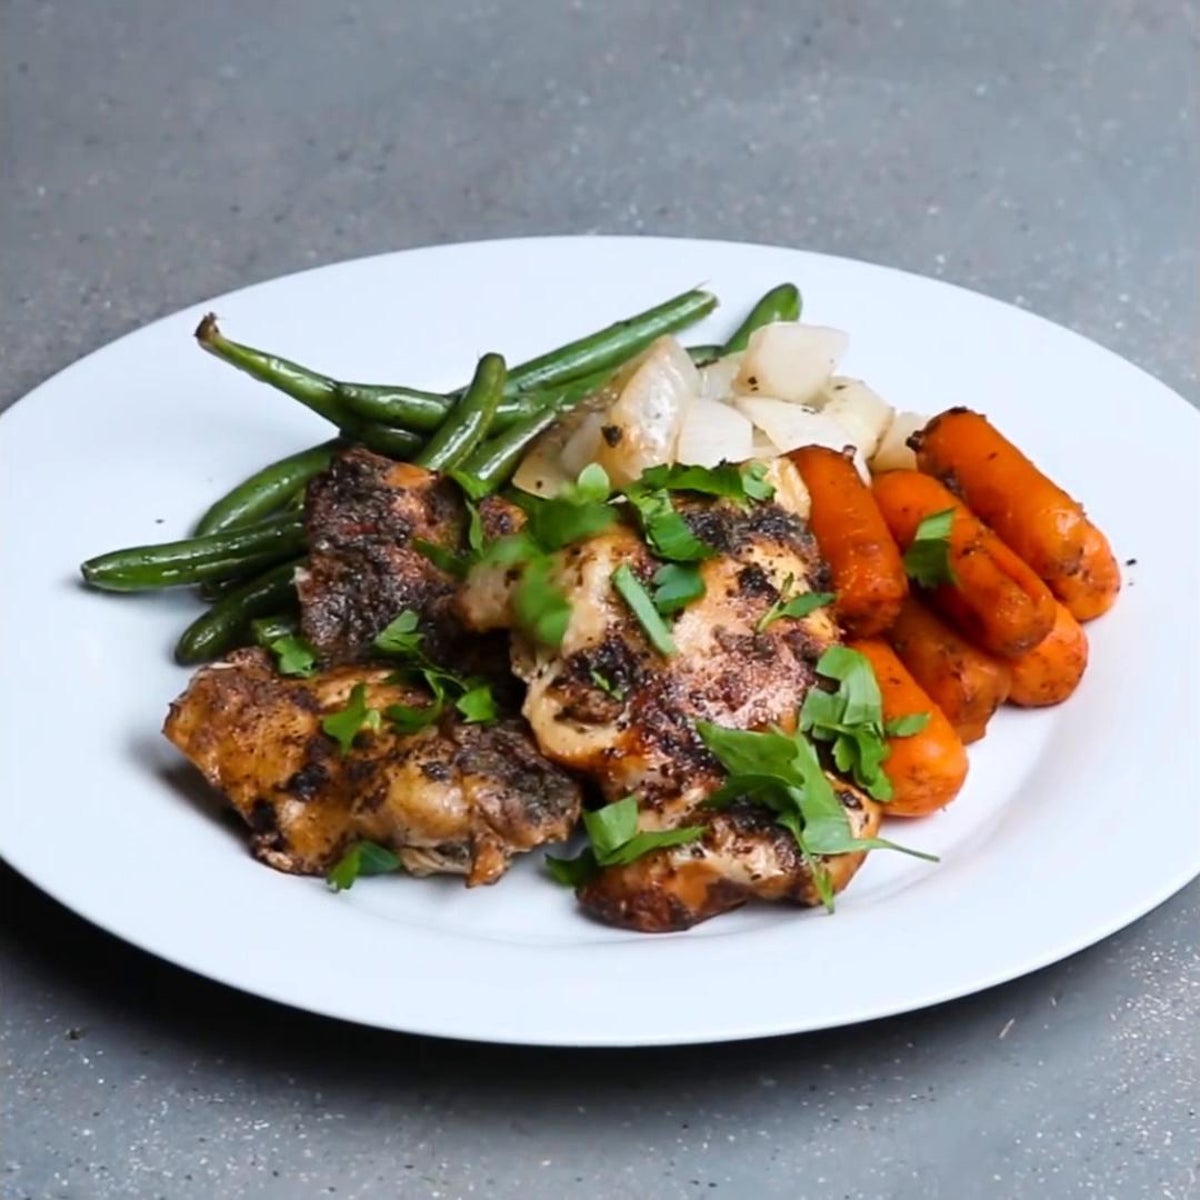 Slow Cooker Balsamic Chicken with Carrots - Slow Cooker Gourmet